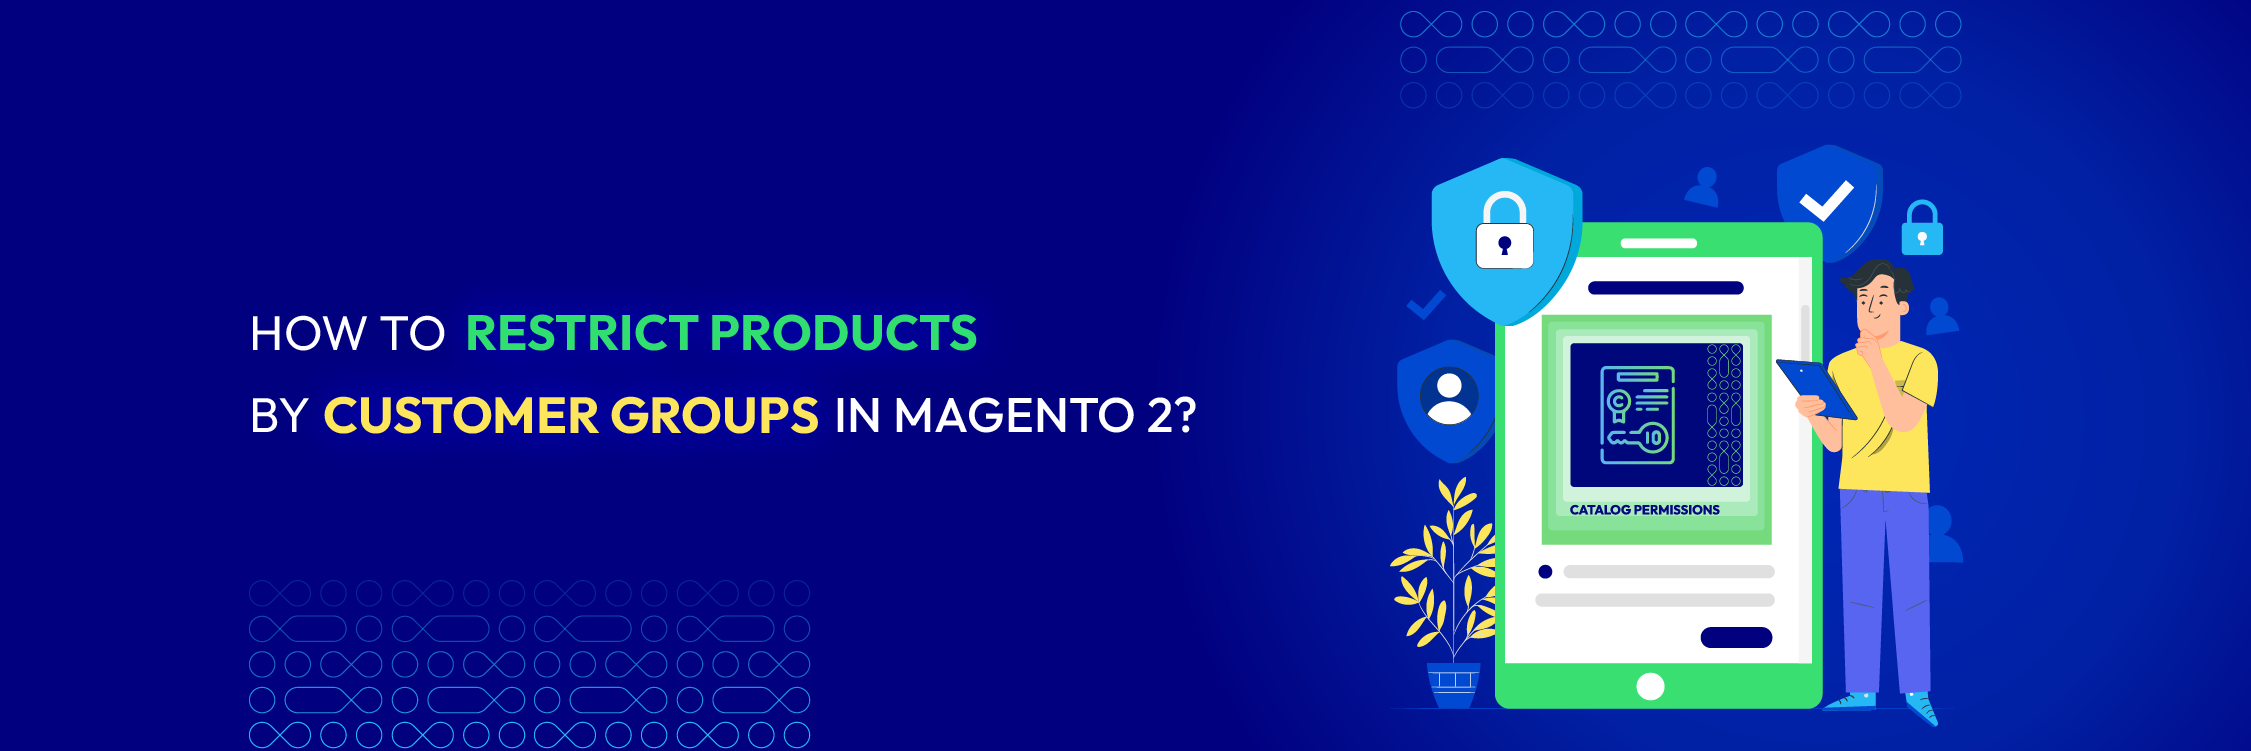 How to Restrict Products By Customer Group in Magento 2?